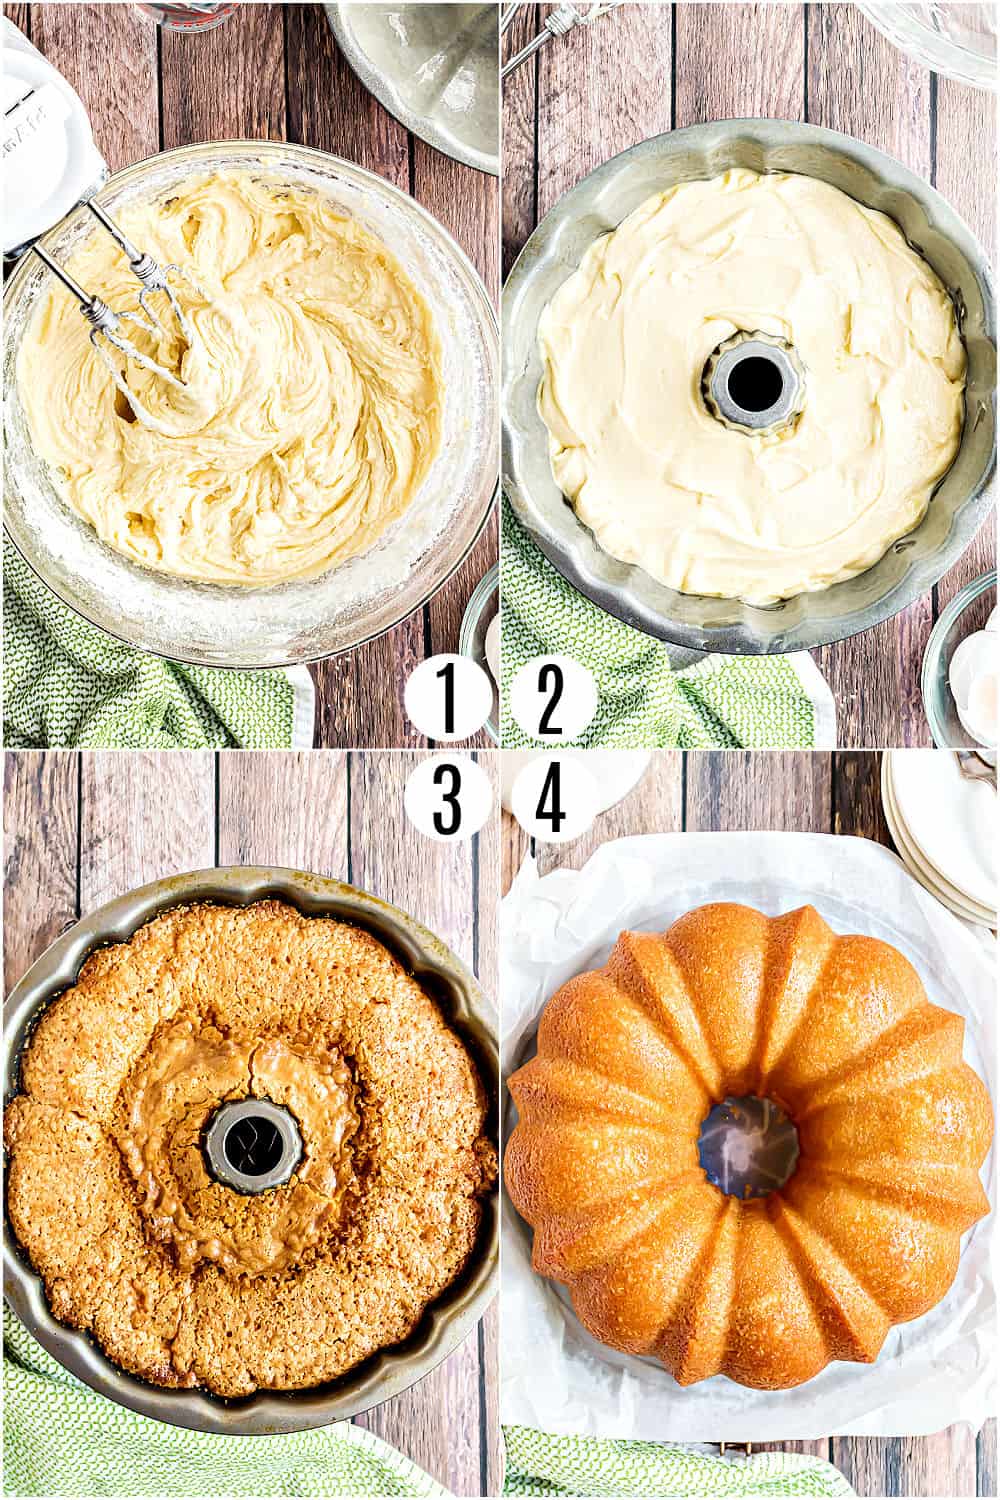 Step by step photos showing how to make pound cake.